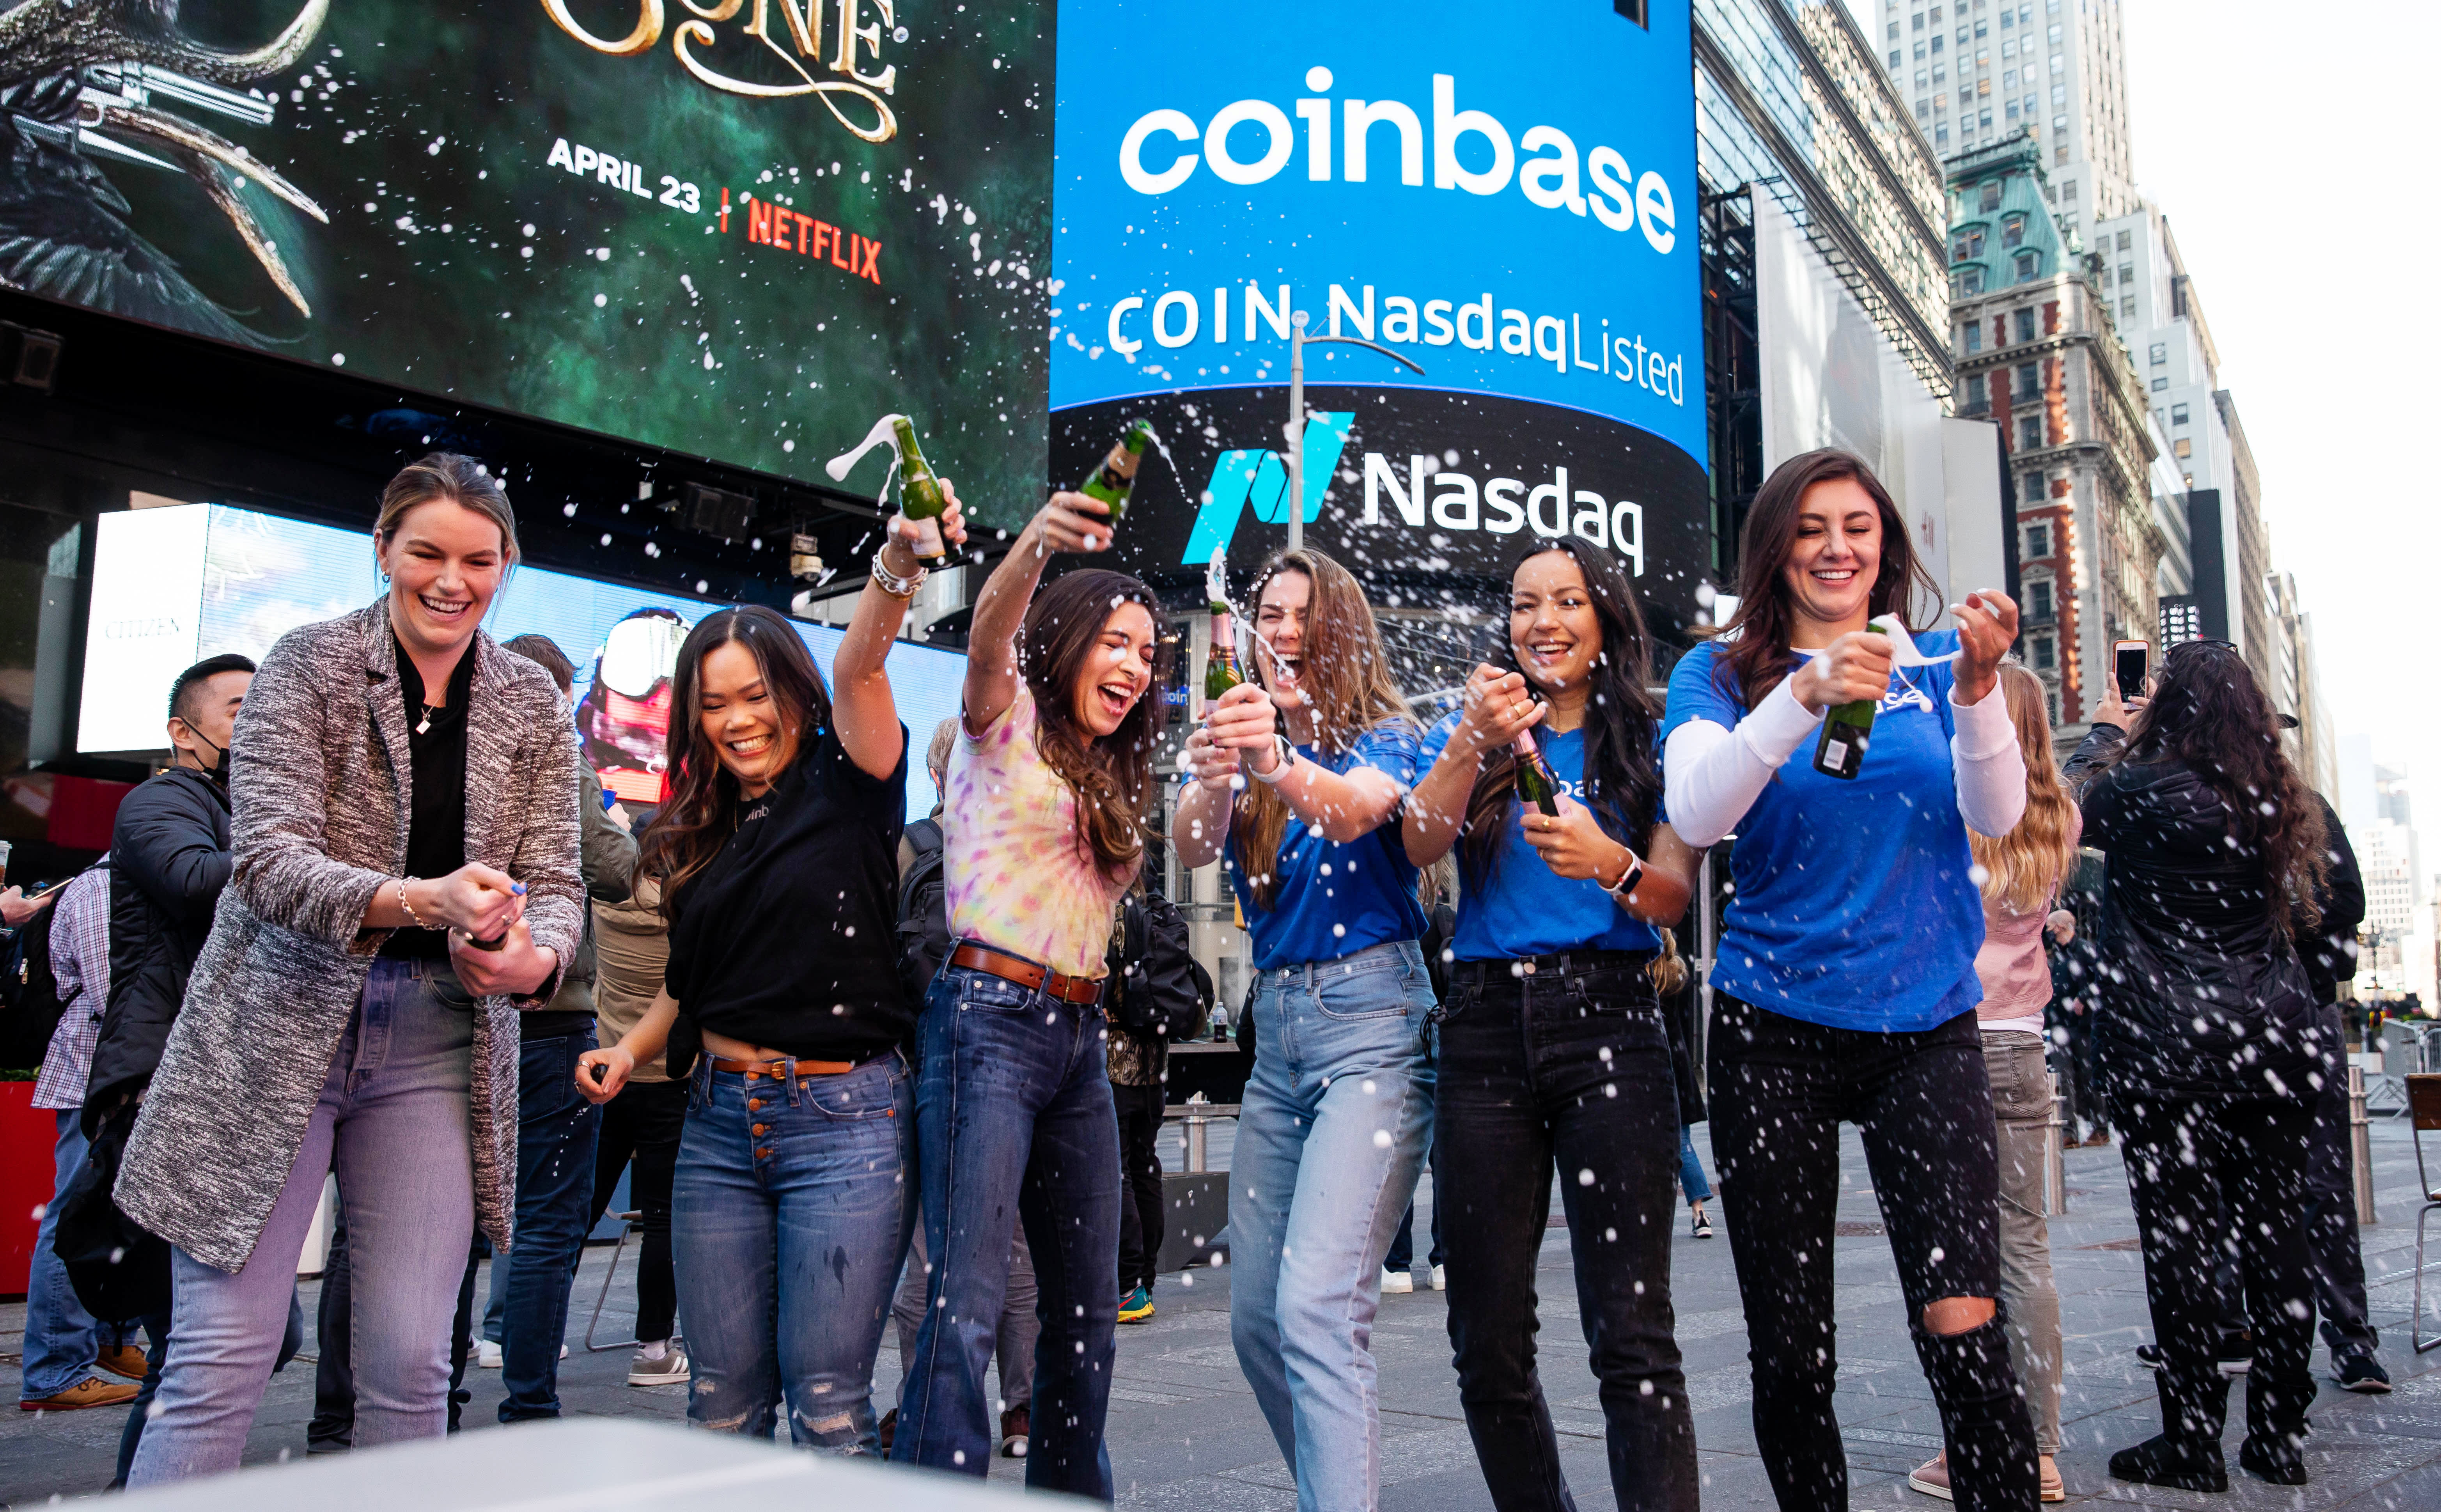 Coinbase (COIN) rises in the premarket after the debut of Nasdaq